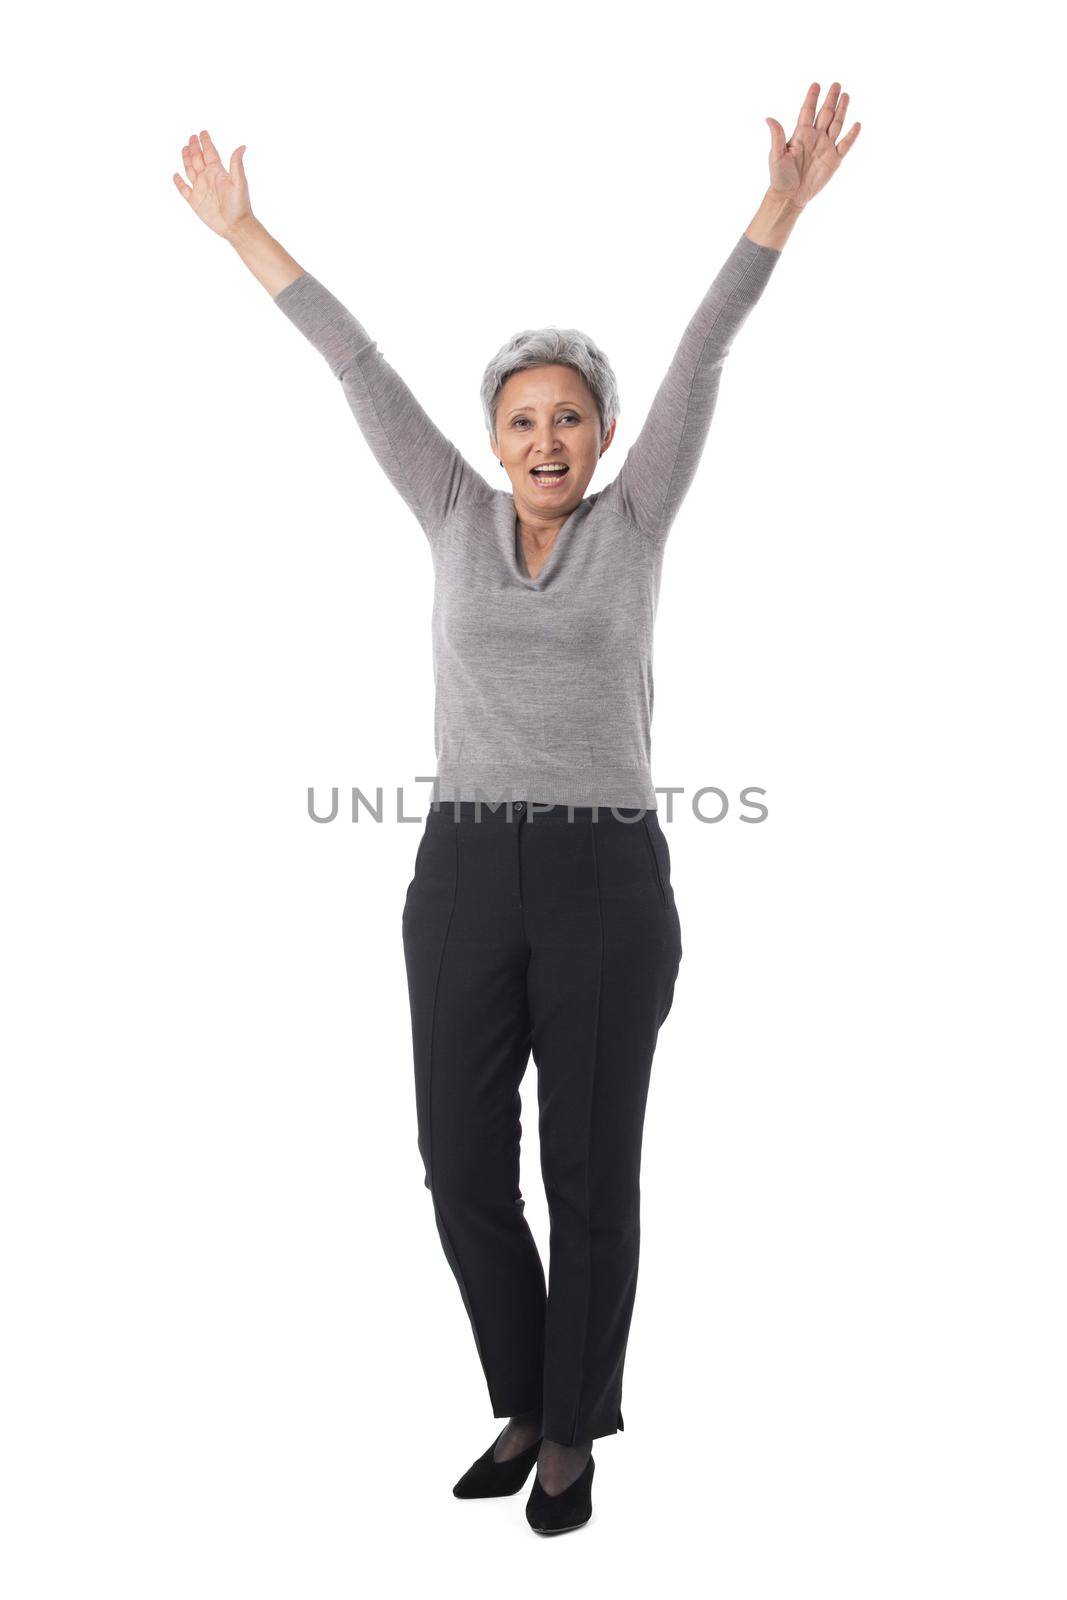 Business woman with raised arms by ALotOfPeople